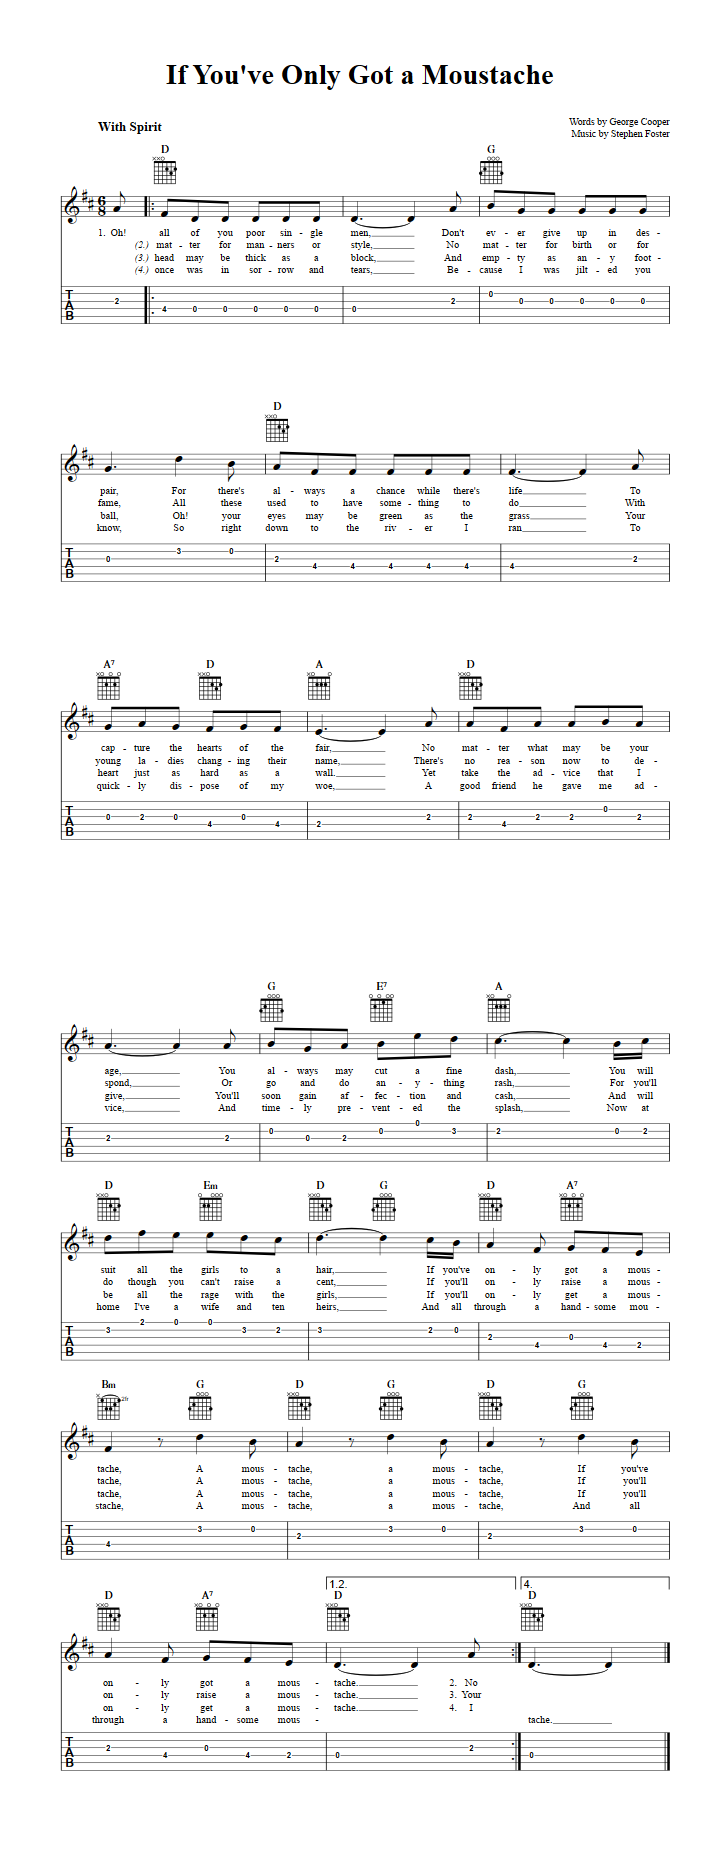 If You've Only Got a Moustache Guitar Tab